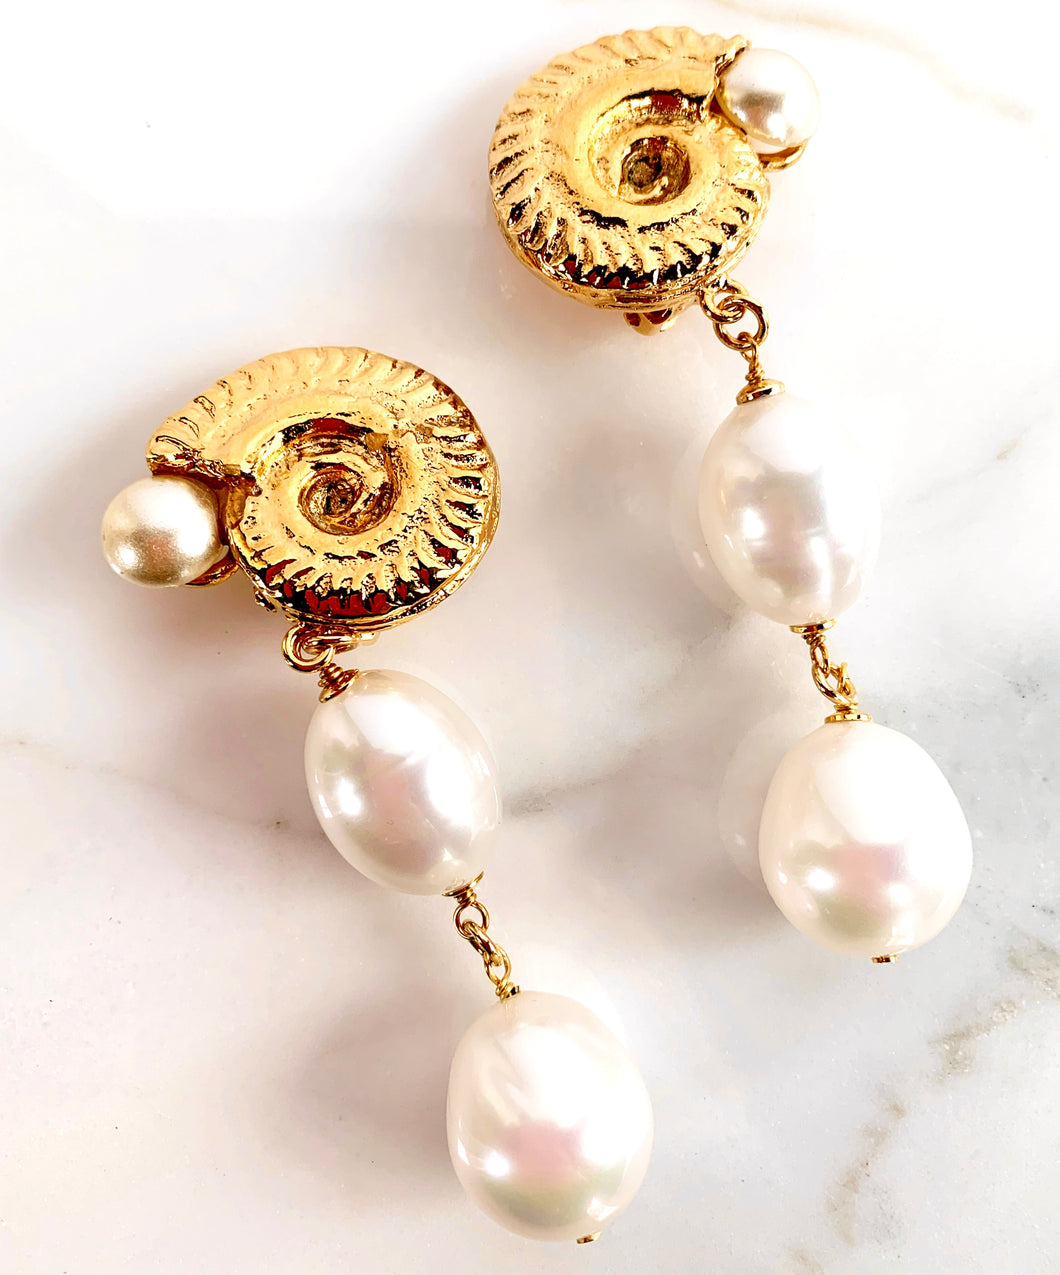 CHANEL RARE ROBERT GOOSSENS COQUILLAGE GRIPOIX GLASS PEARLS EARRINGS